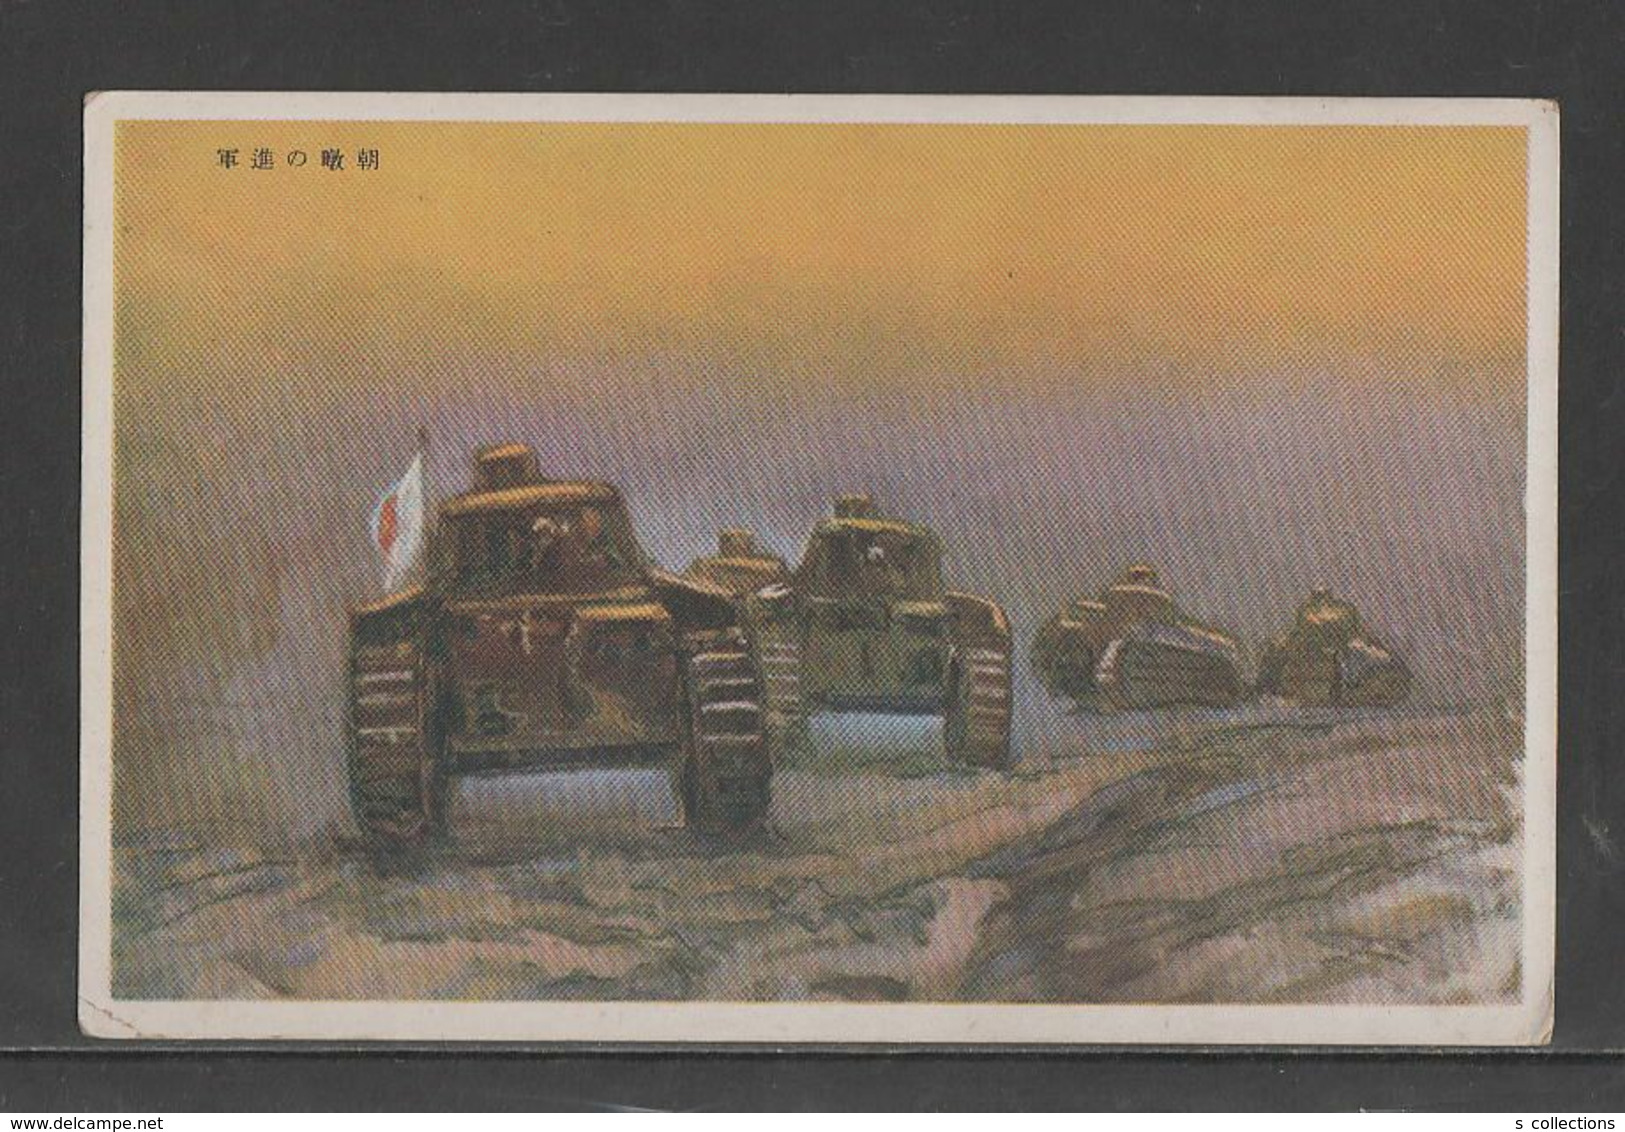 JAPAN WWII Military Japanese TANK Picture Postcard CENTRAL CHINA WW2 MANCHURIA CHINE MANDCHOUKOUO JAPON GIAPPONE - 1943-45 Shanghai & Nanjing